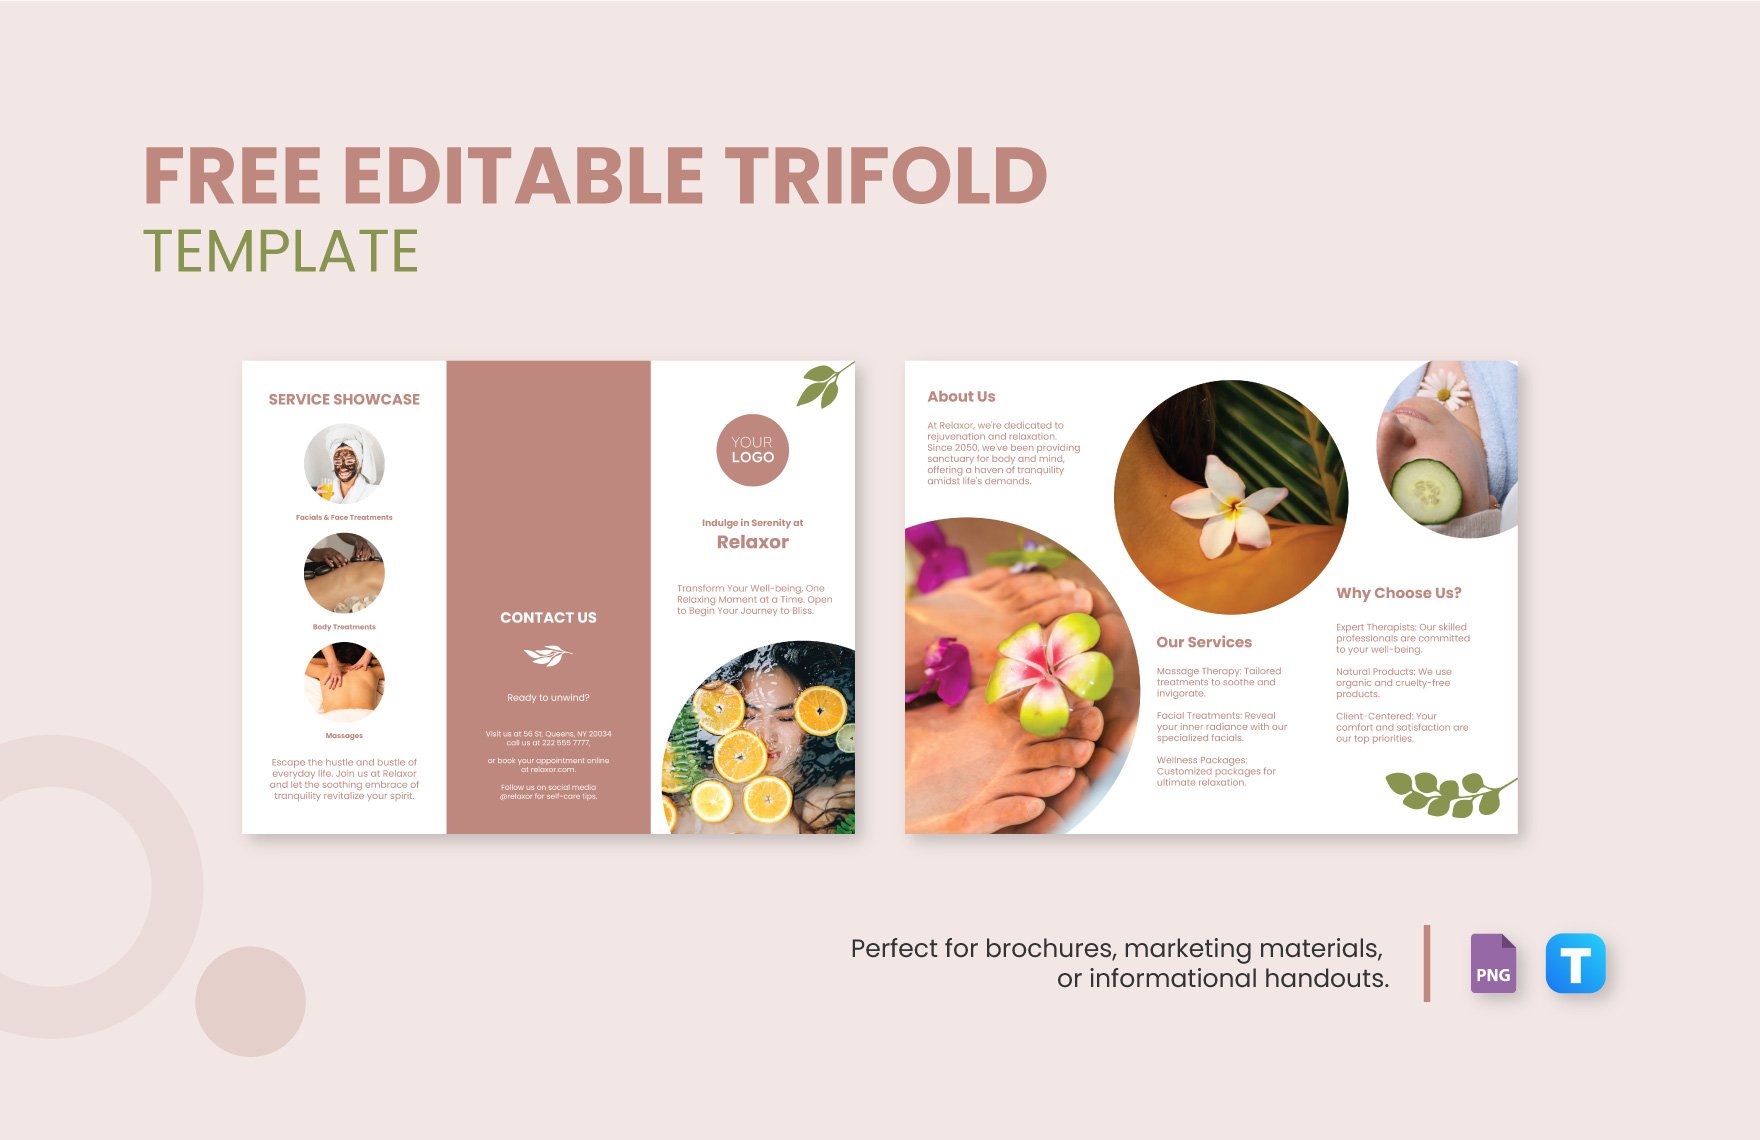 Free Editable Trifold Template